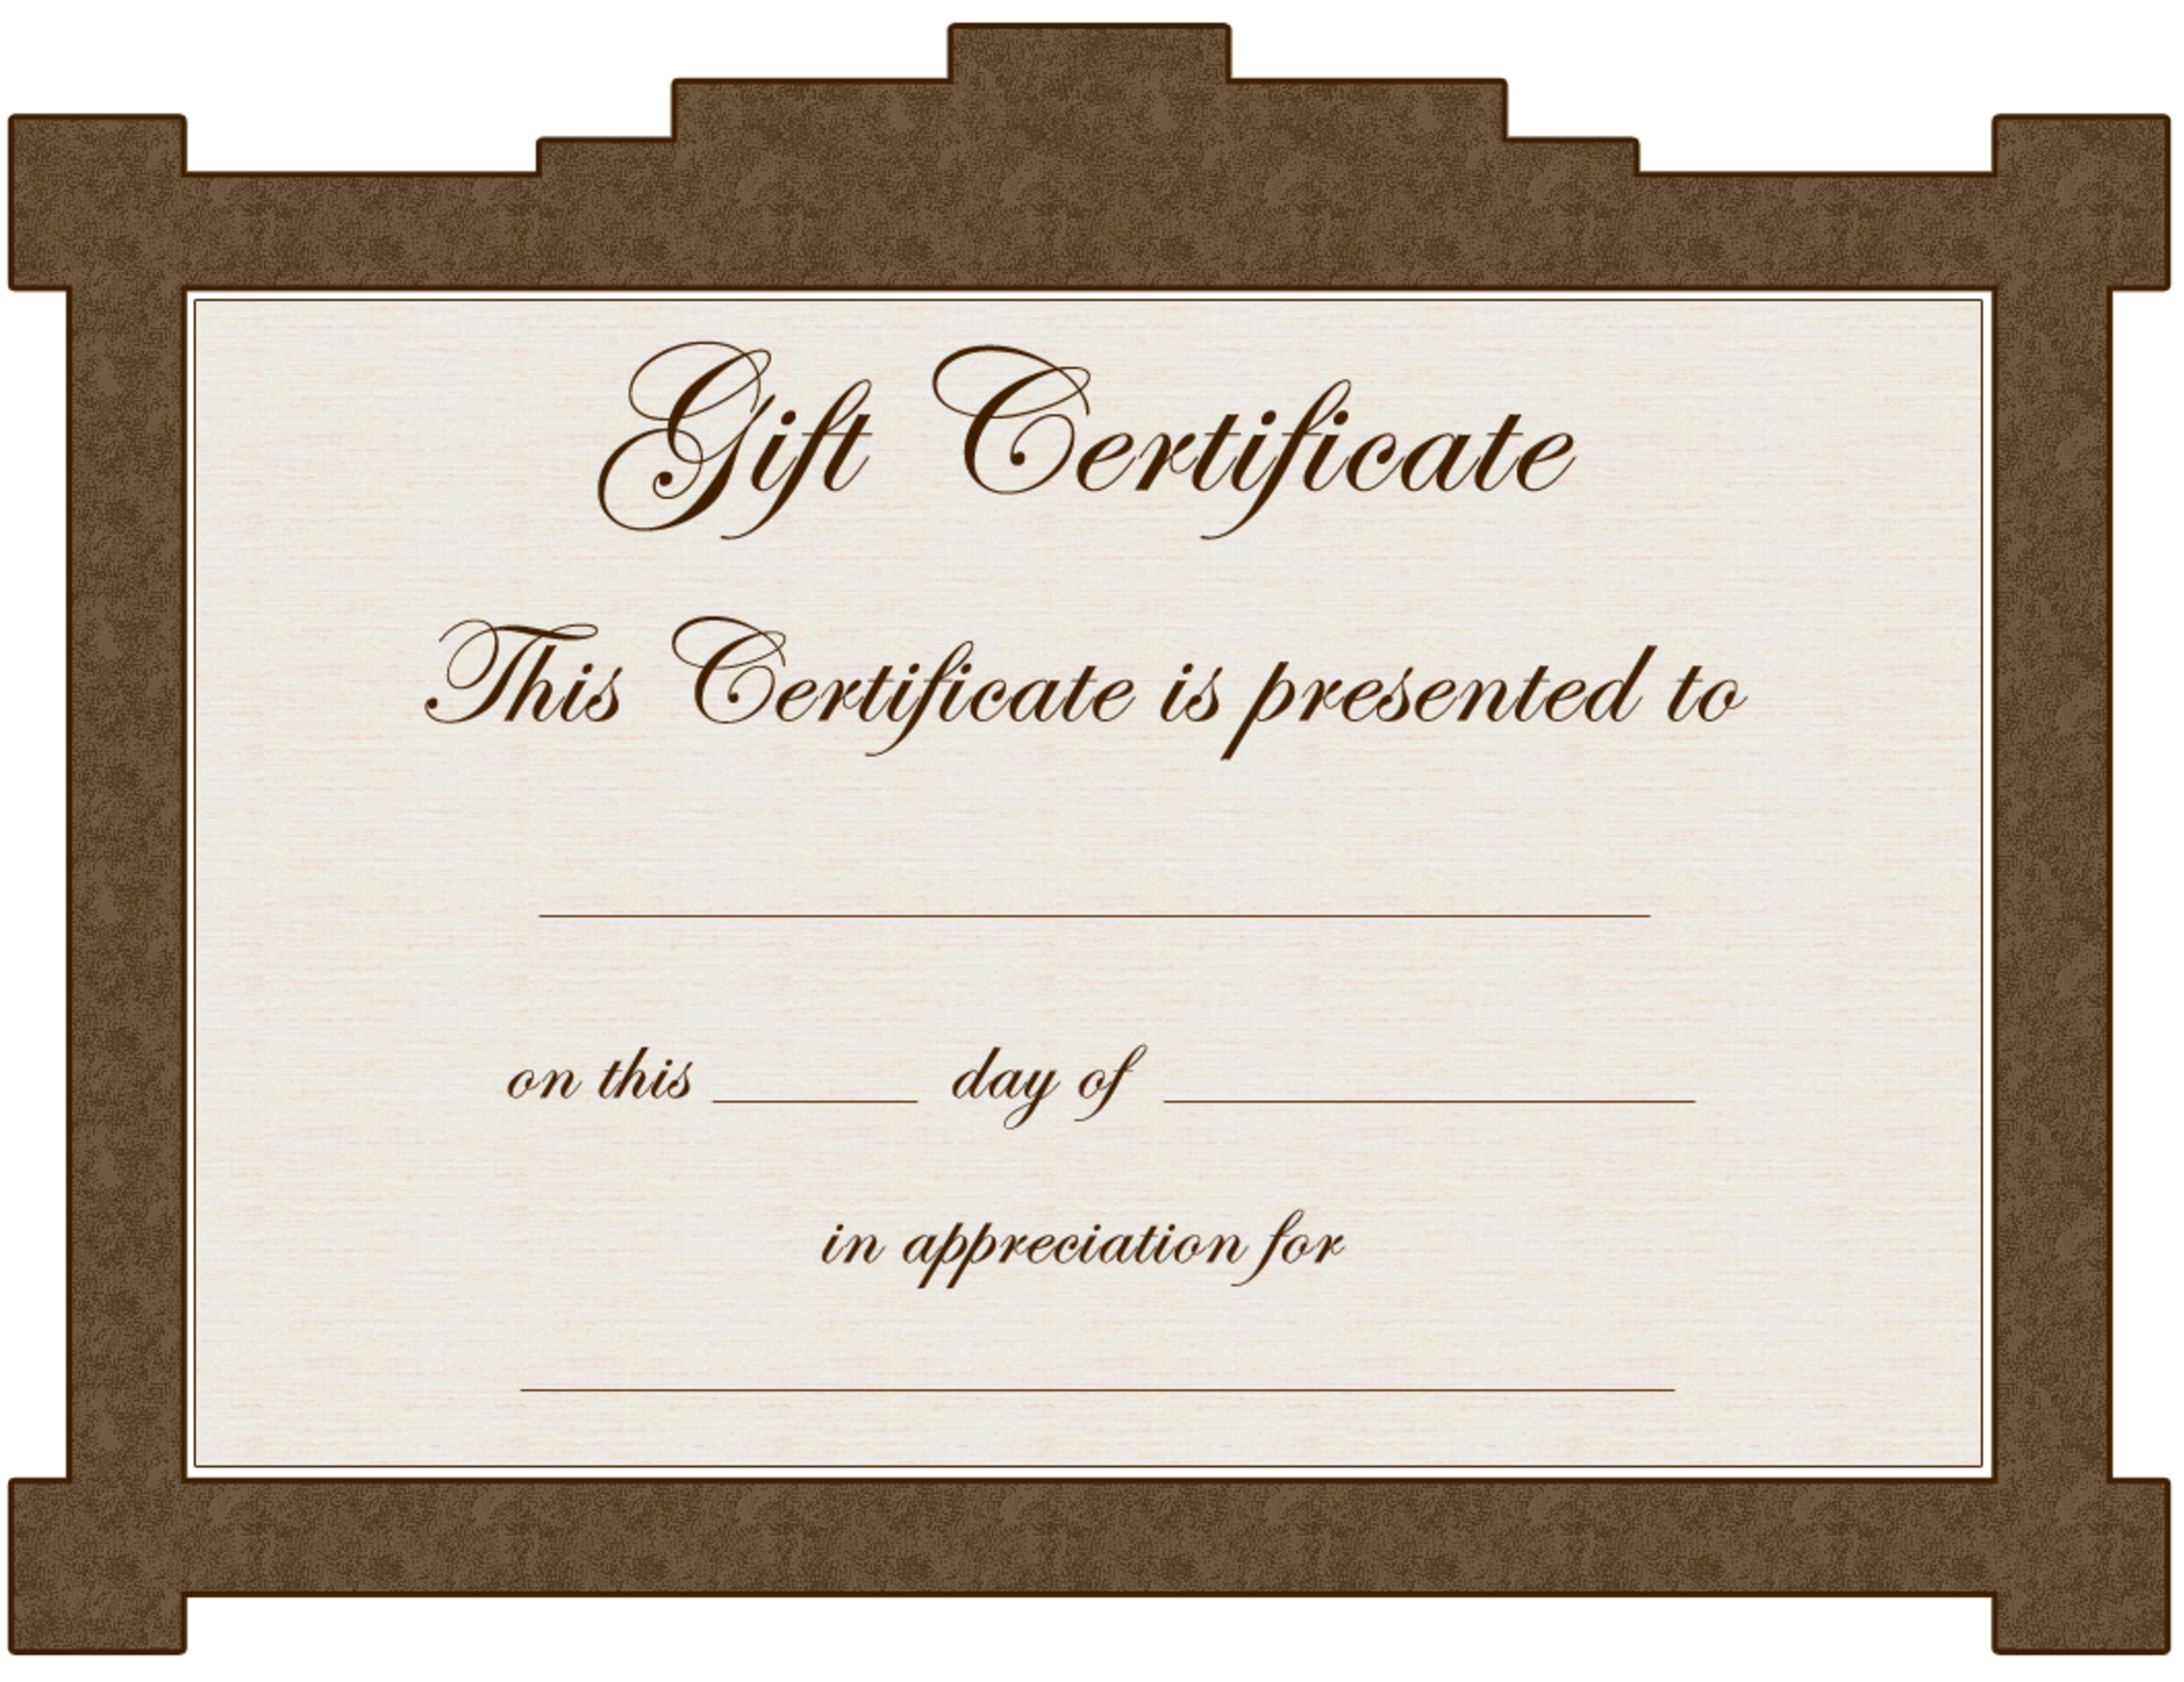 Gift Certificate Templates To Print | Activity Shelter With Regard To Present Certificate Templates